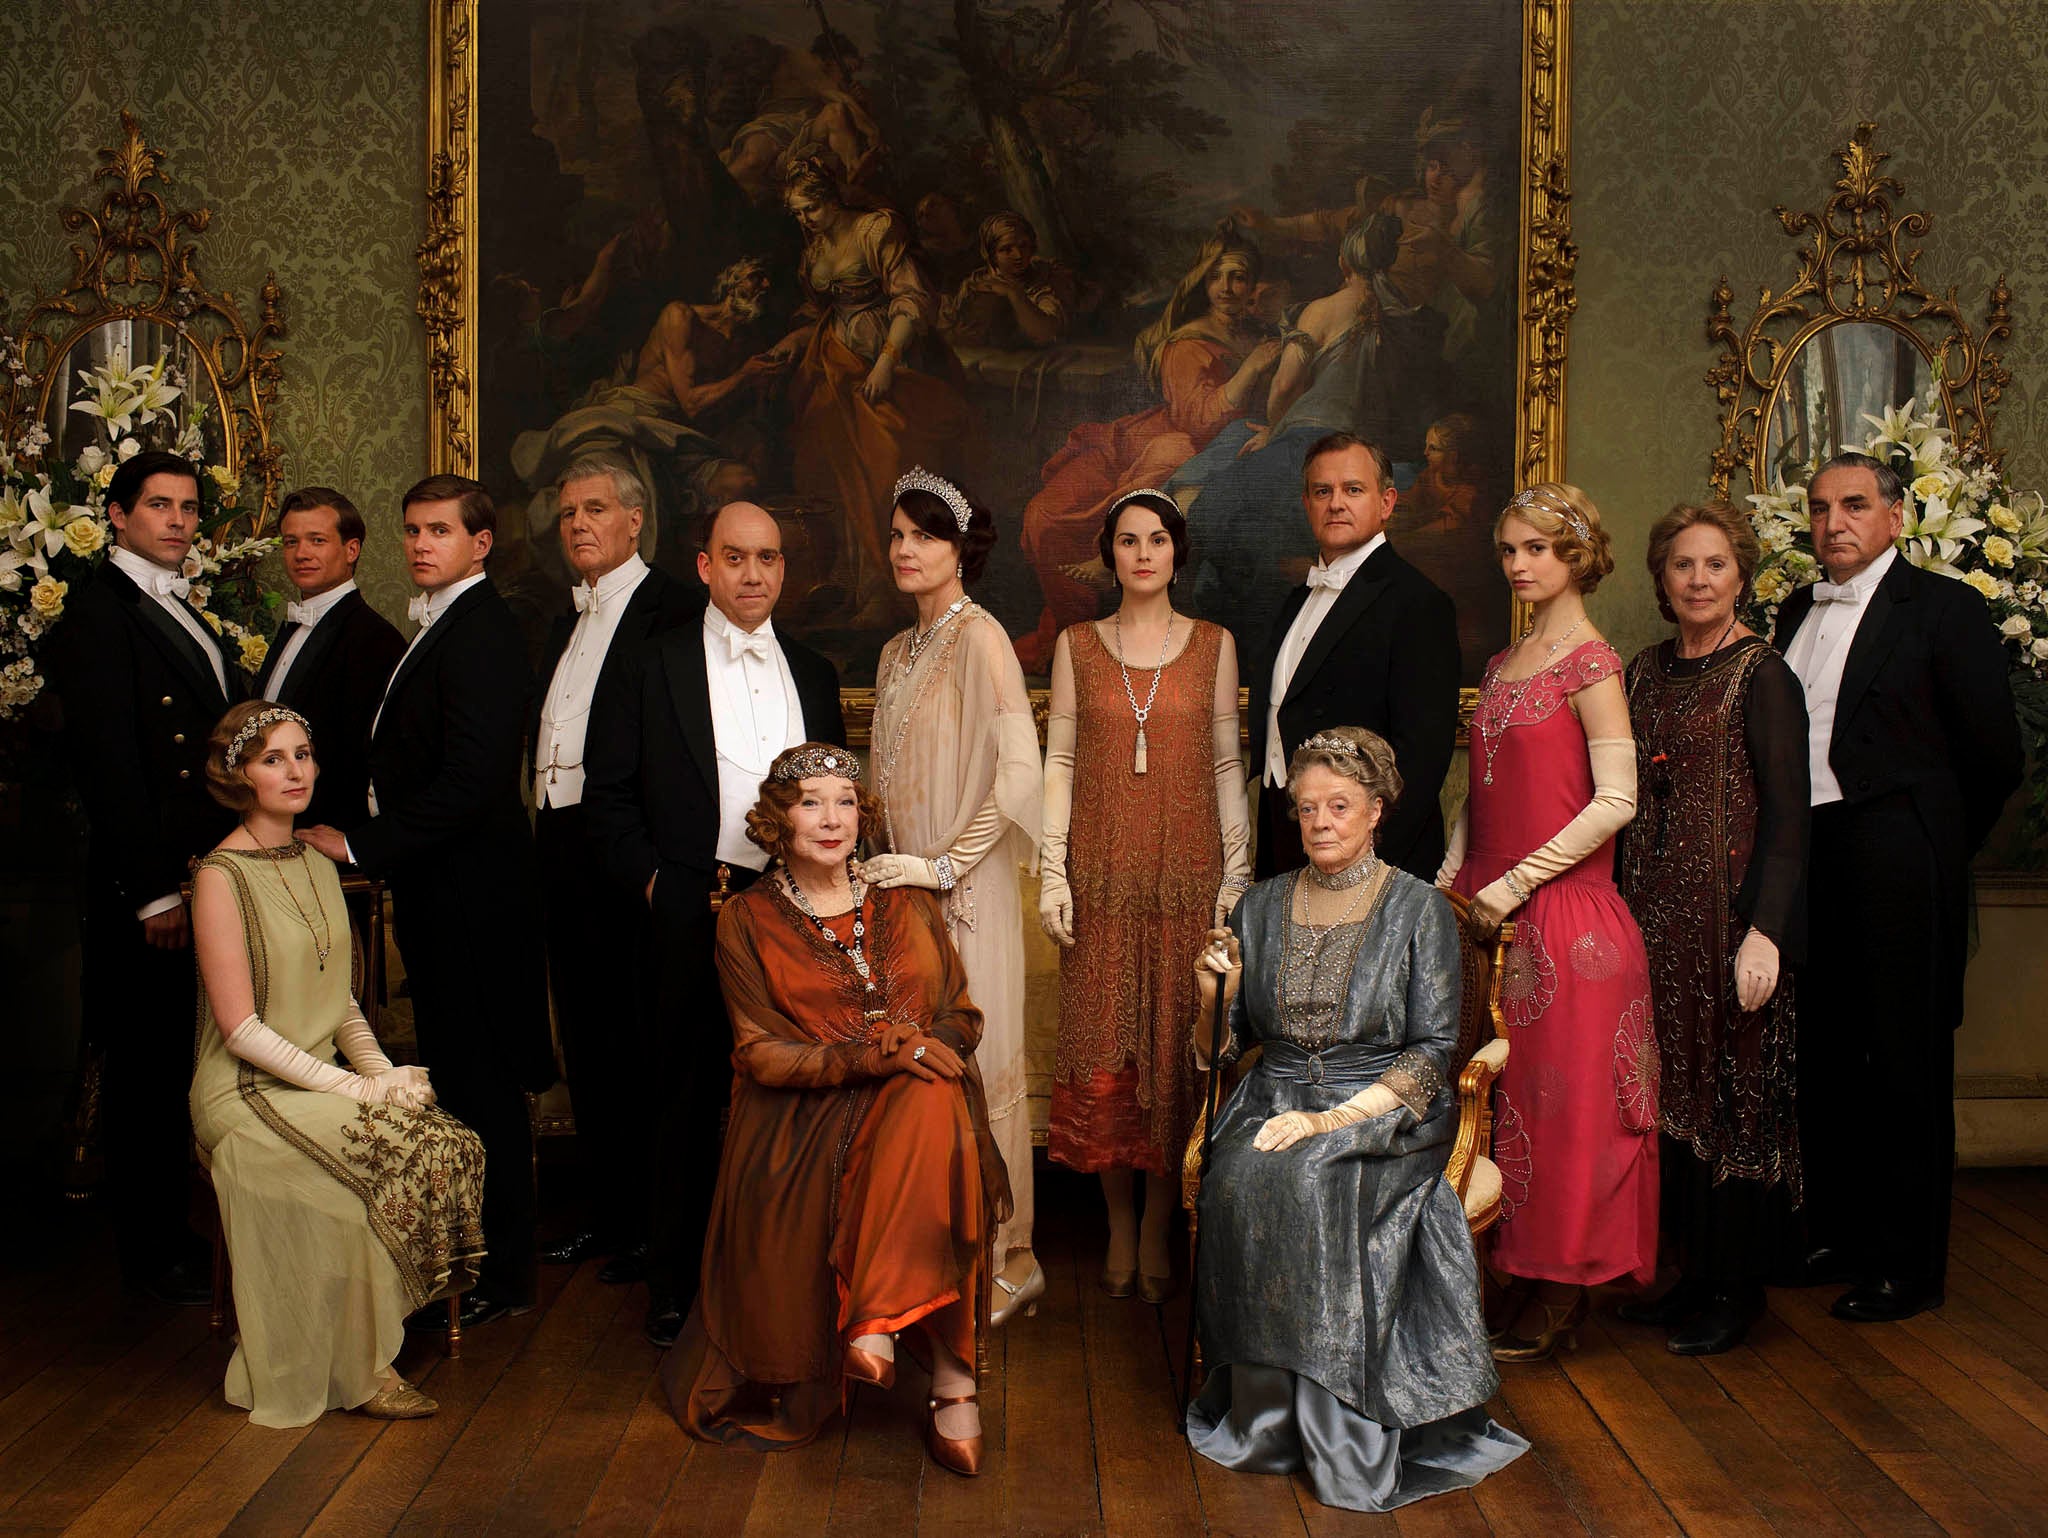 British drama Downton Abbey has been nominated for Best Television Drama Series at the Golden Globes 2014